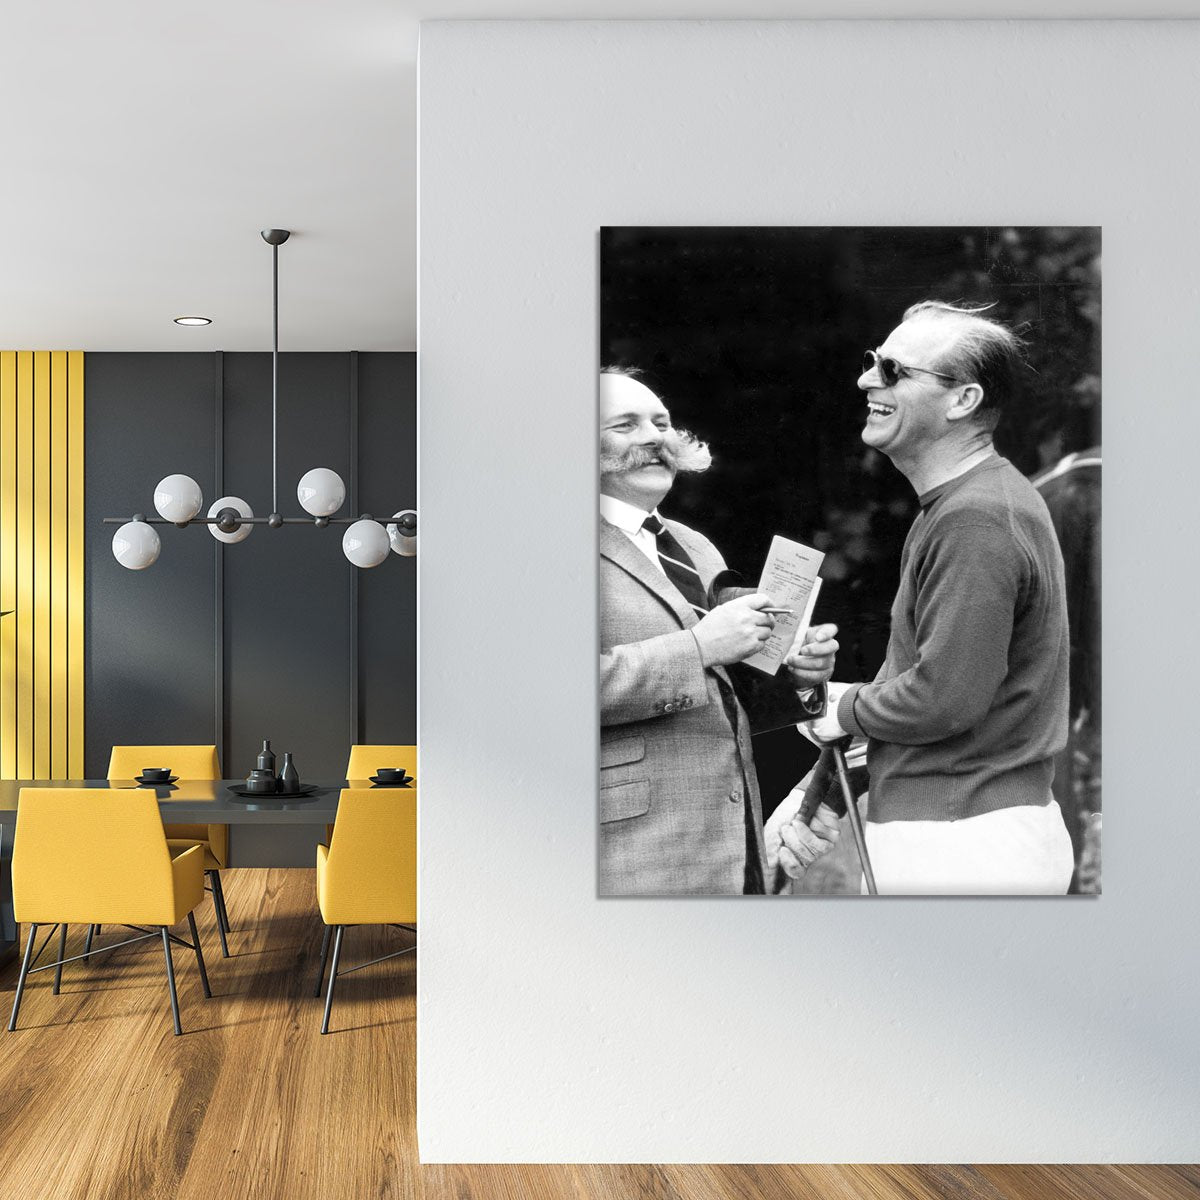 Prince Philip chatting with the comedian Jimmy Edwards Canvas Print or Poster